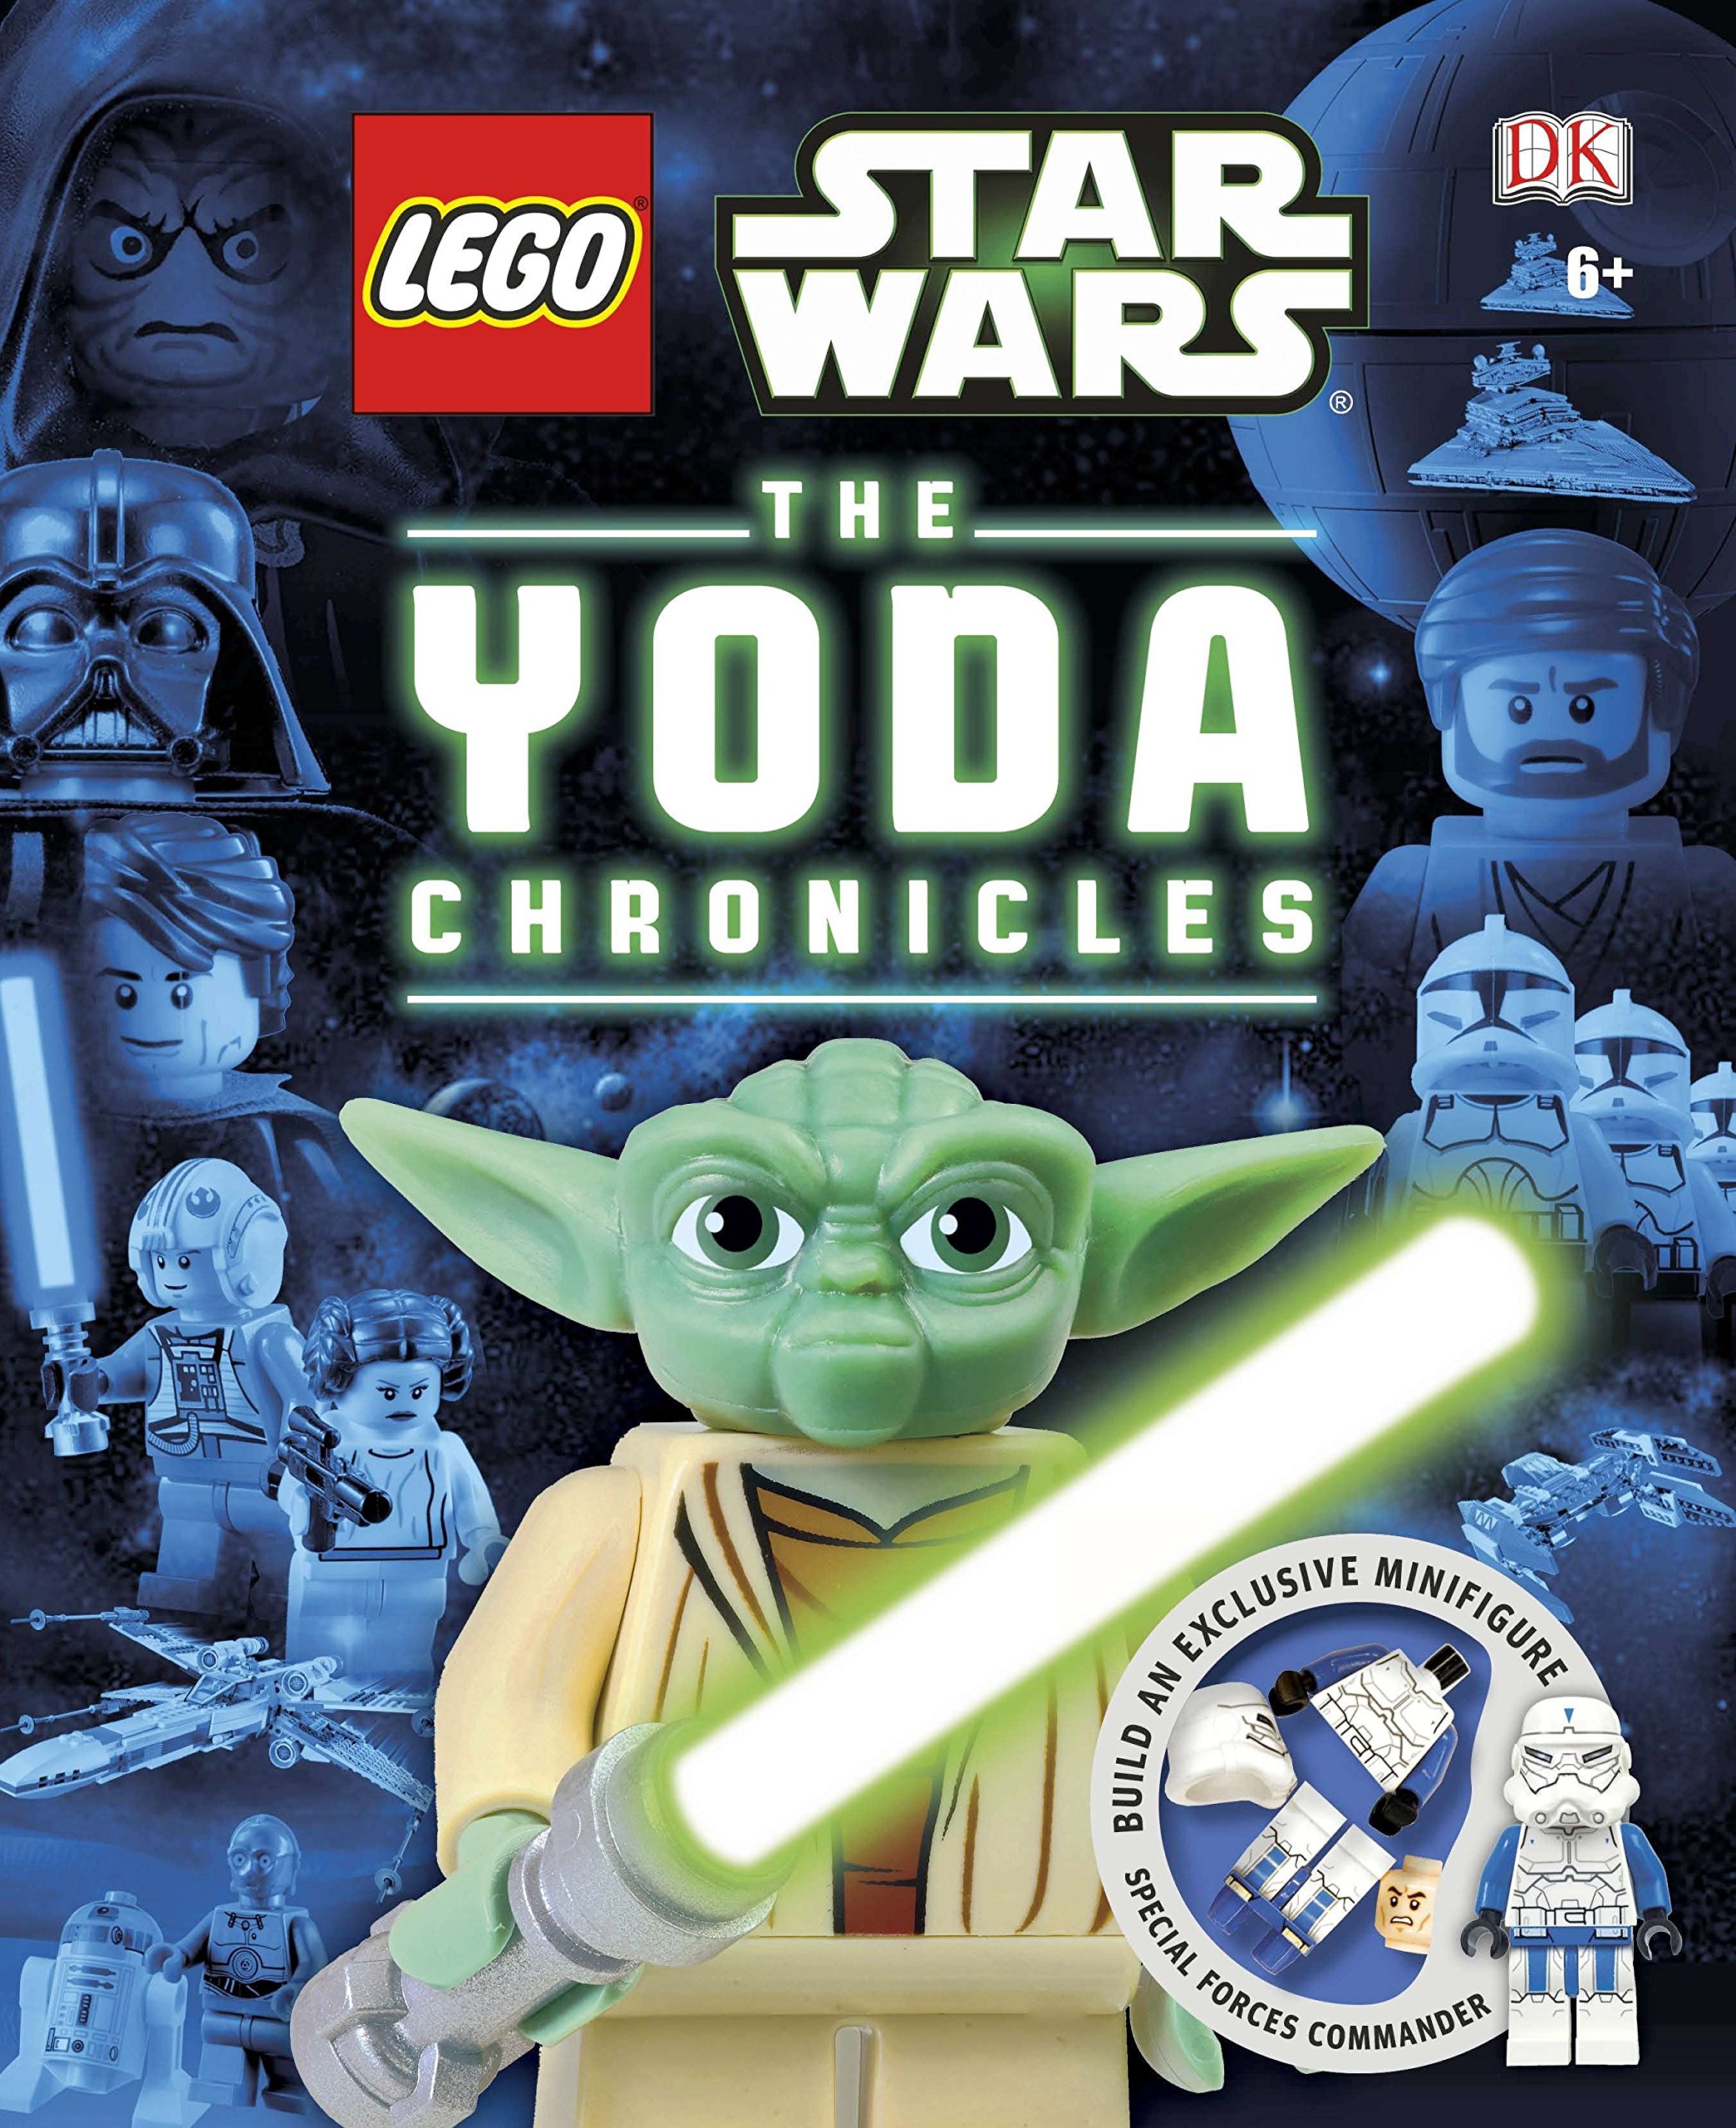 LEGO Star Wars: The Chronicles (book) |